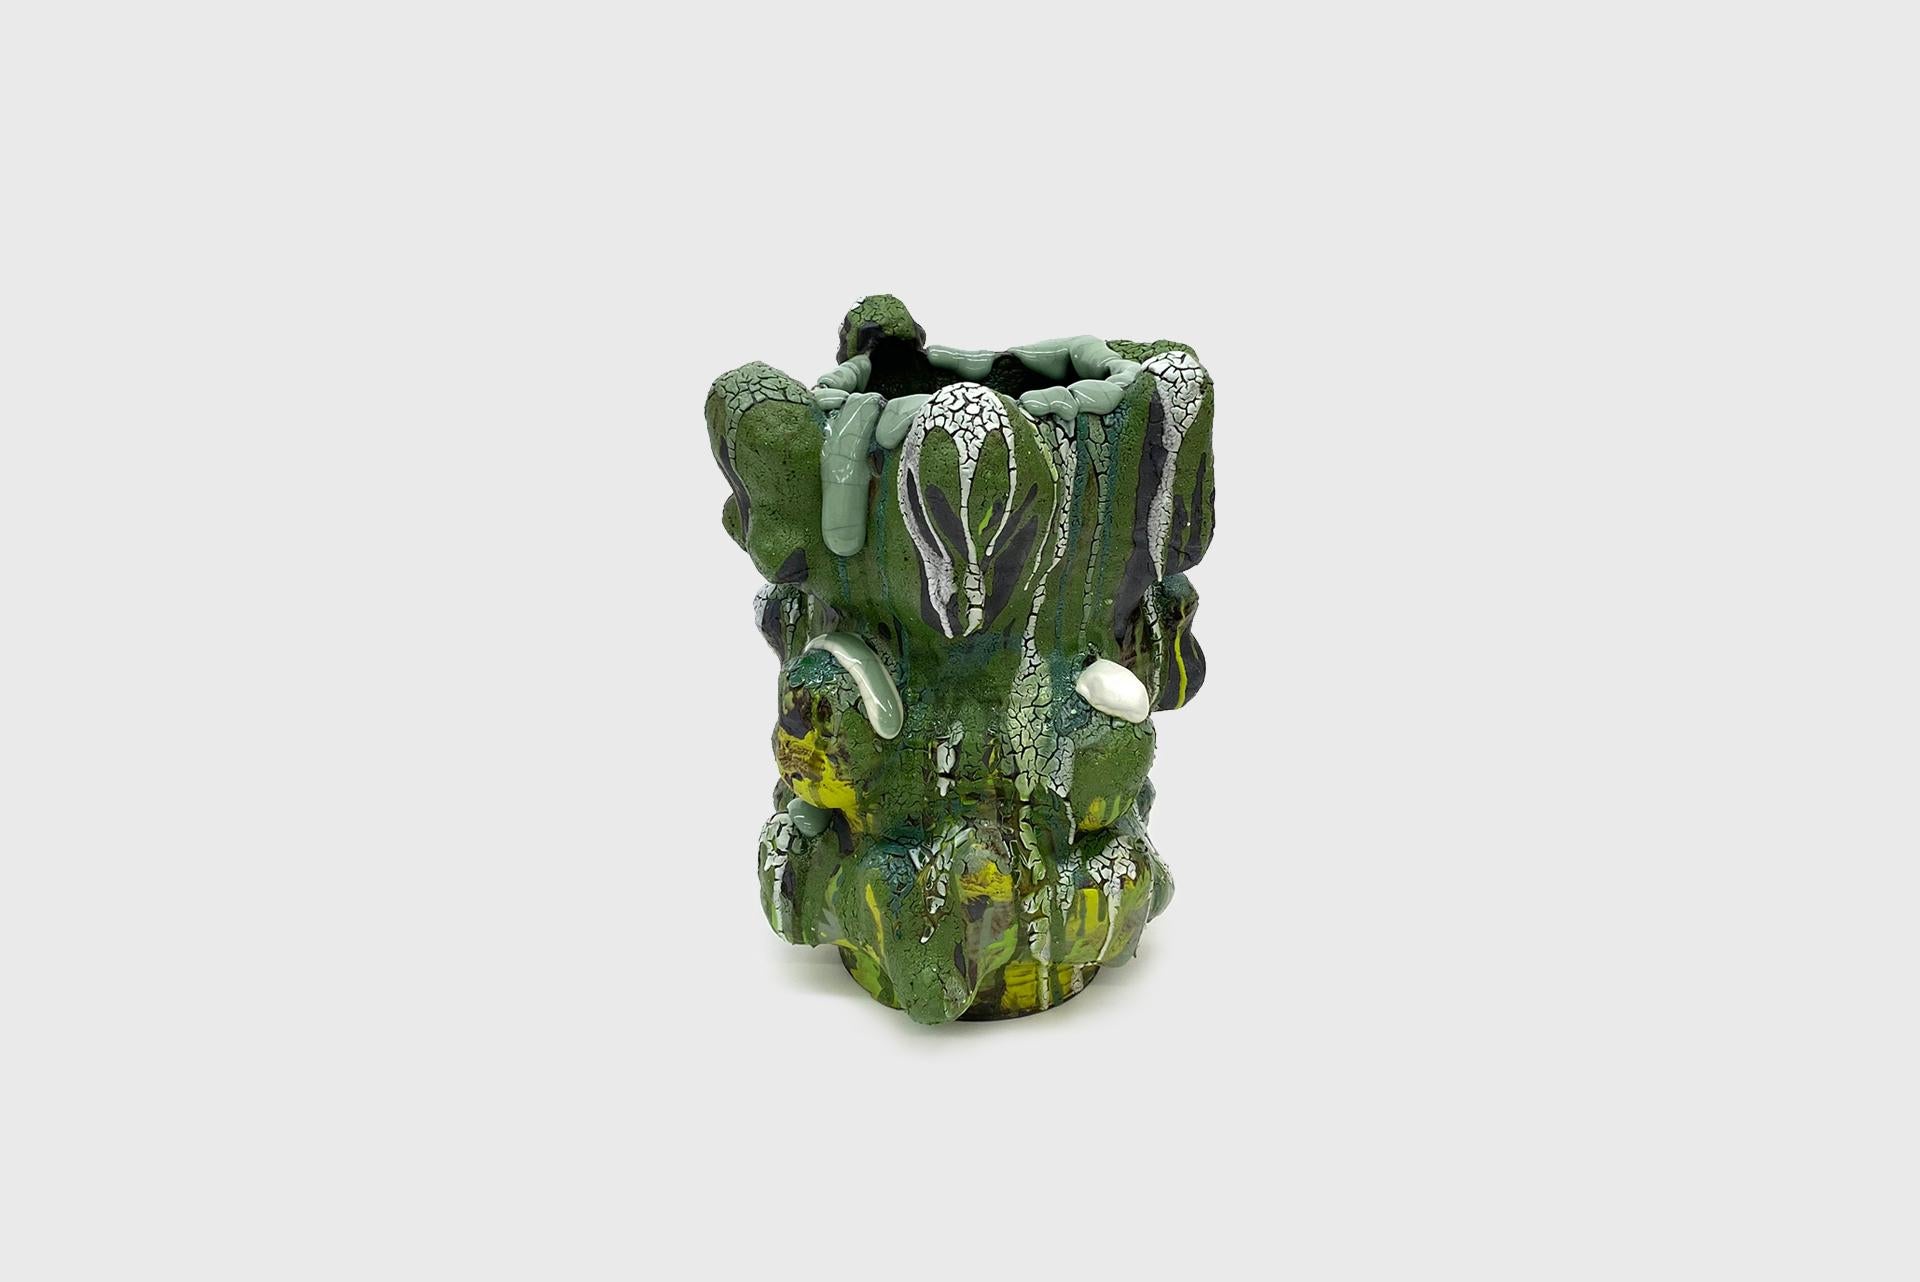 Hand-Crafted Vince Palacios Ceramic Vase Green with Green Lip Contemporary American Clay Art